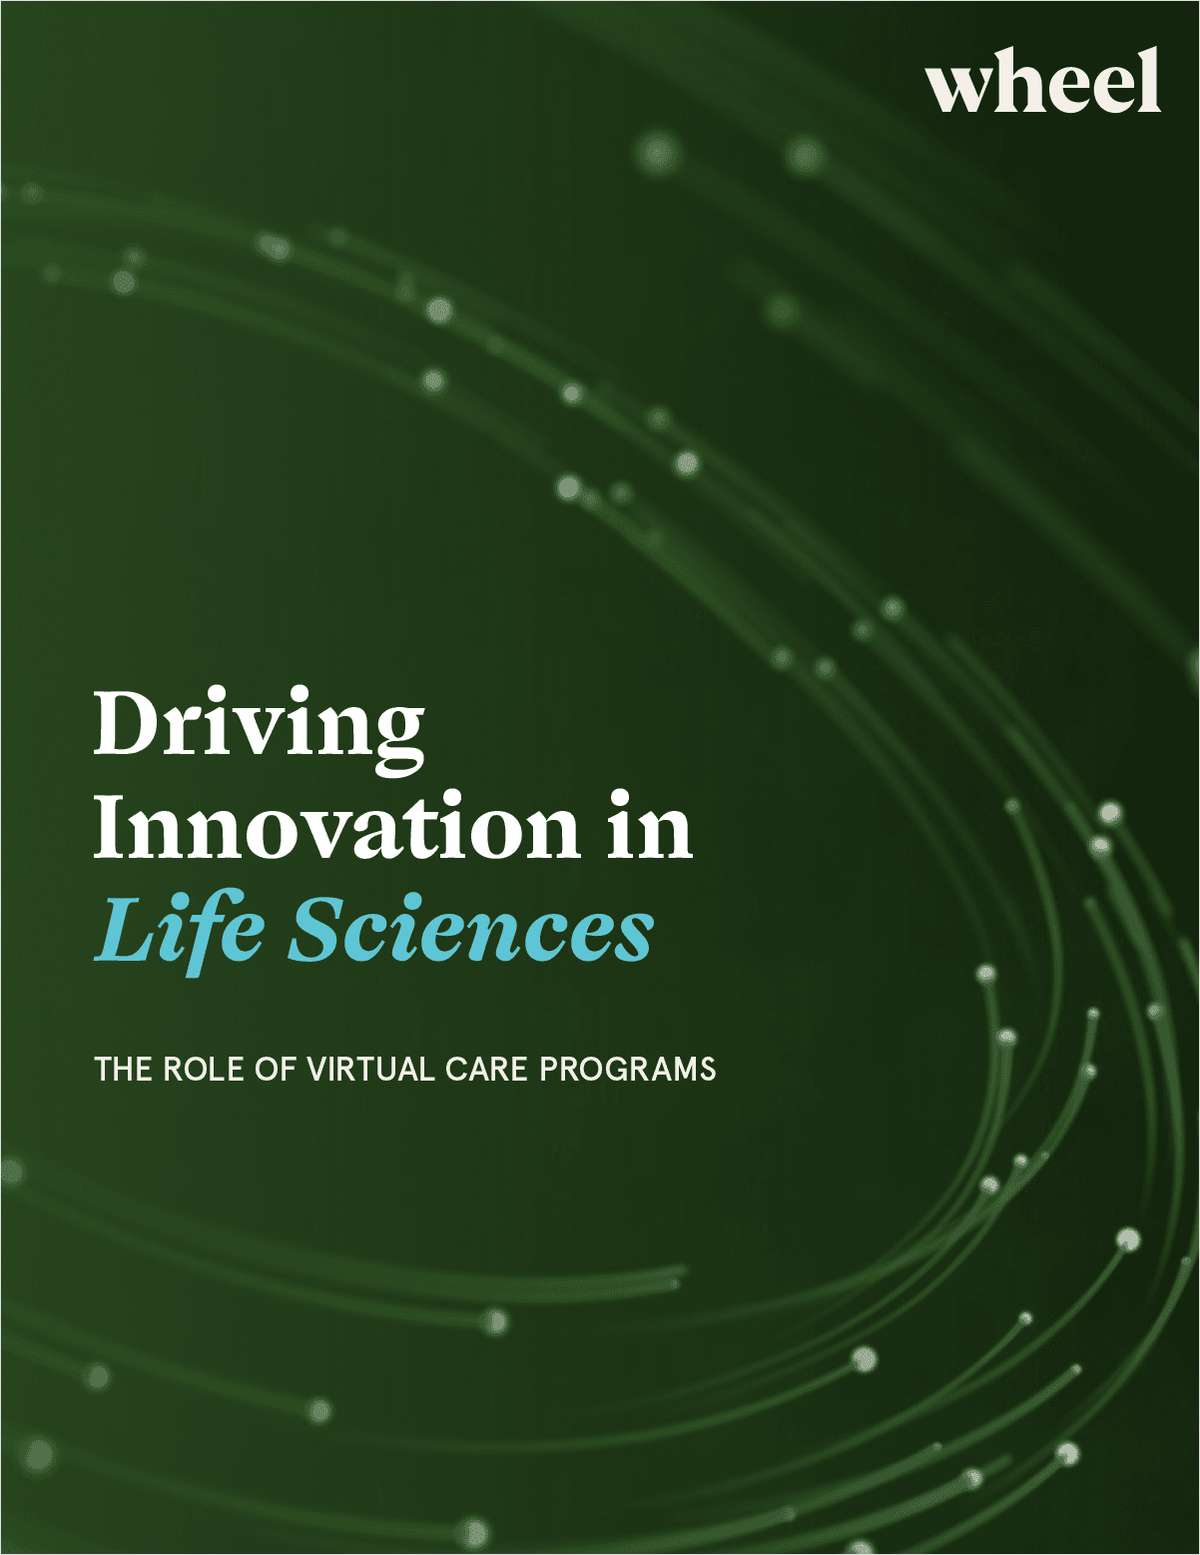 Driving Innovation in Life Sciences With Virtual Care Programs